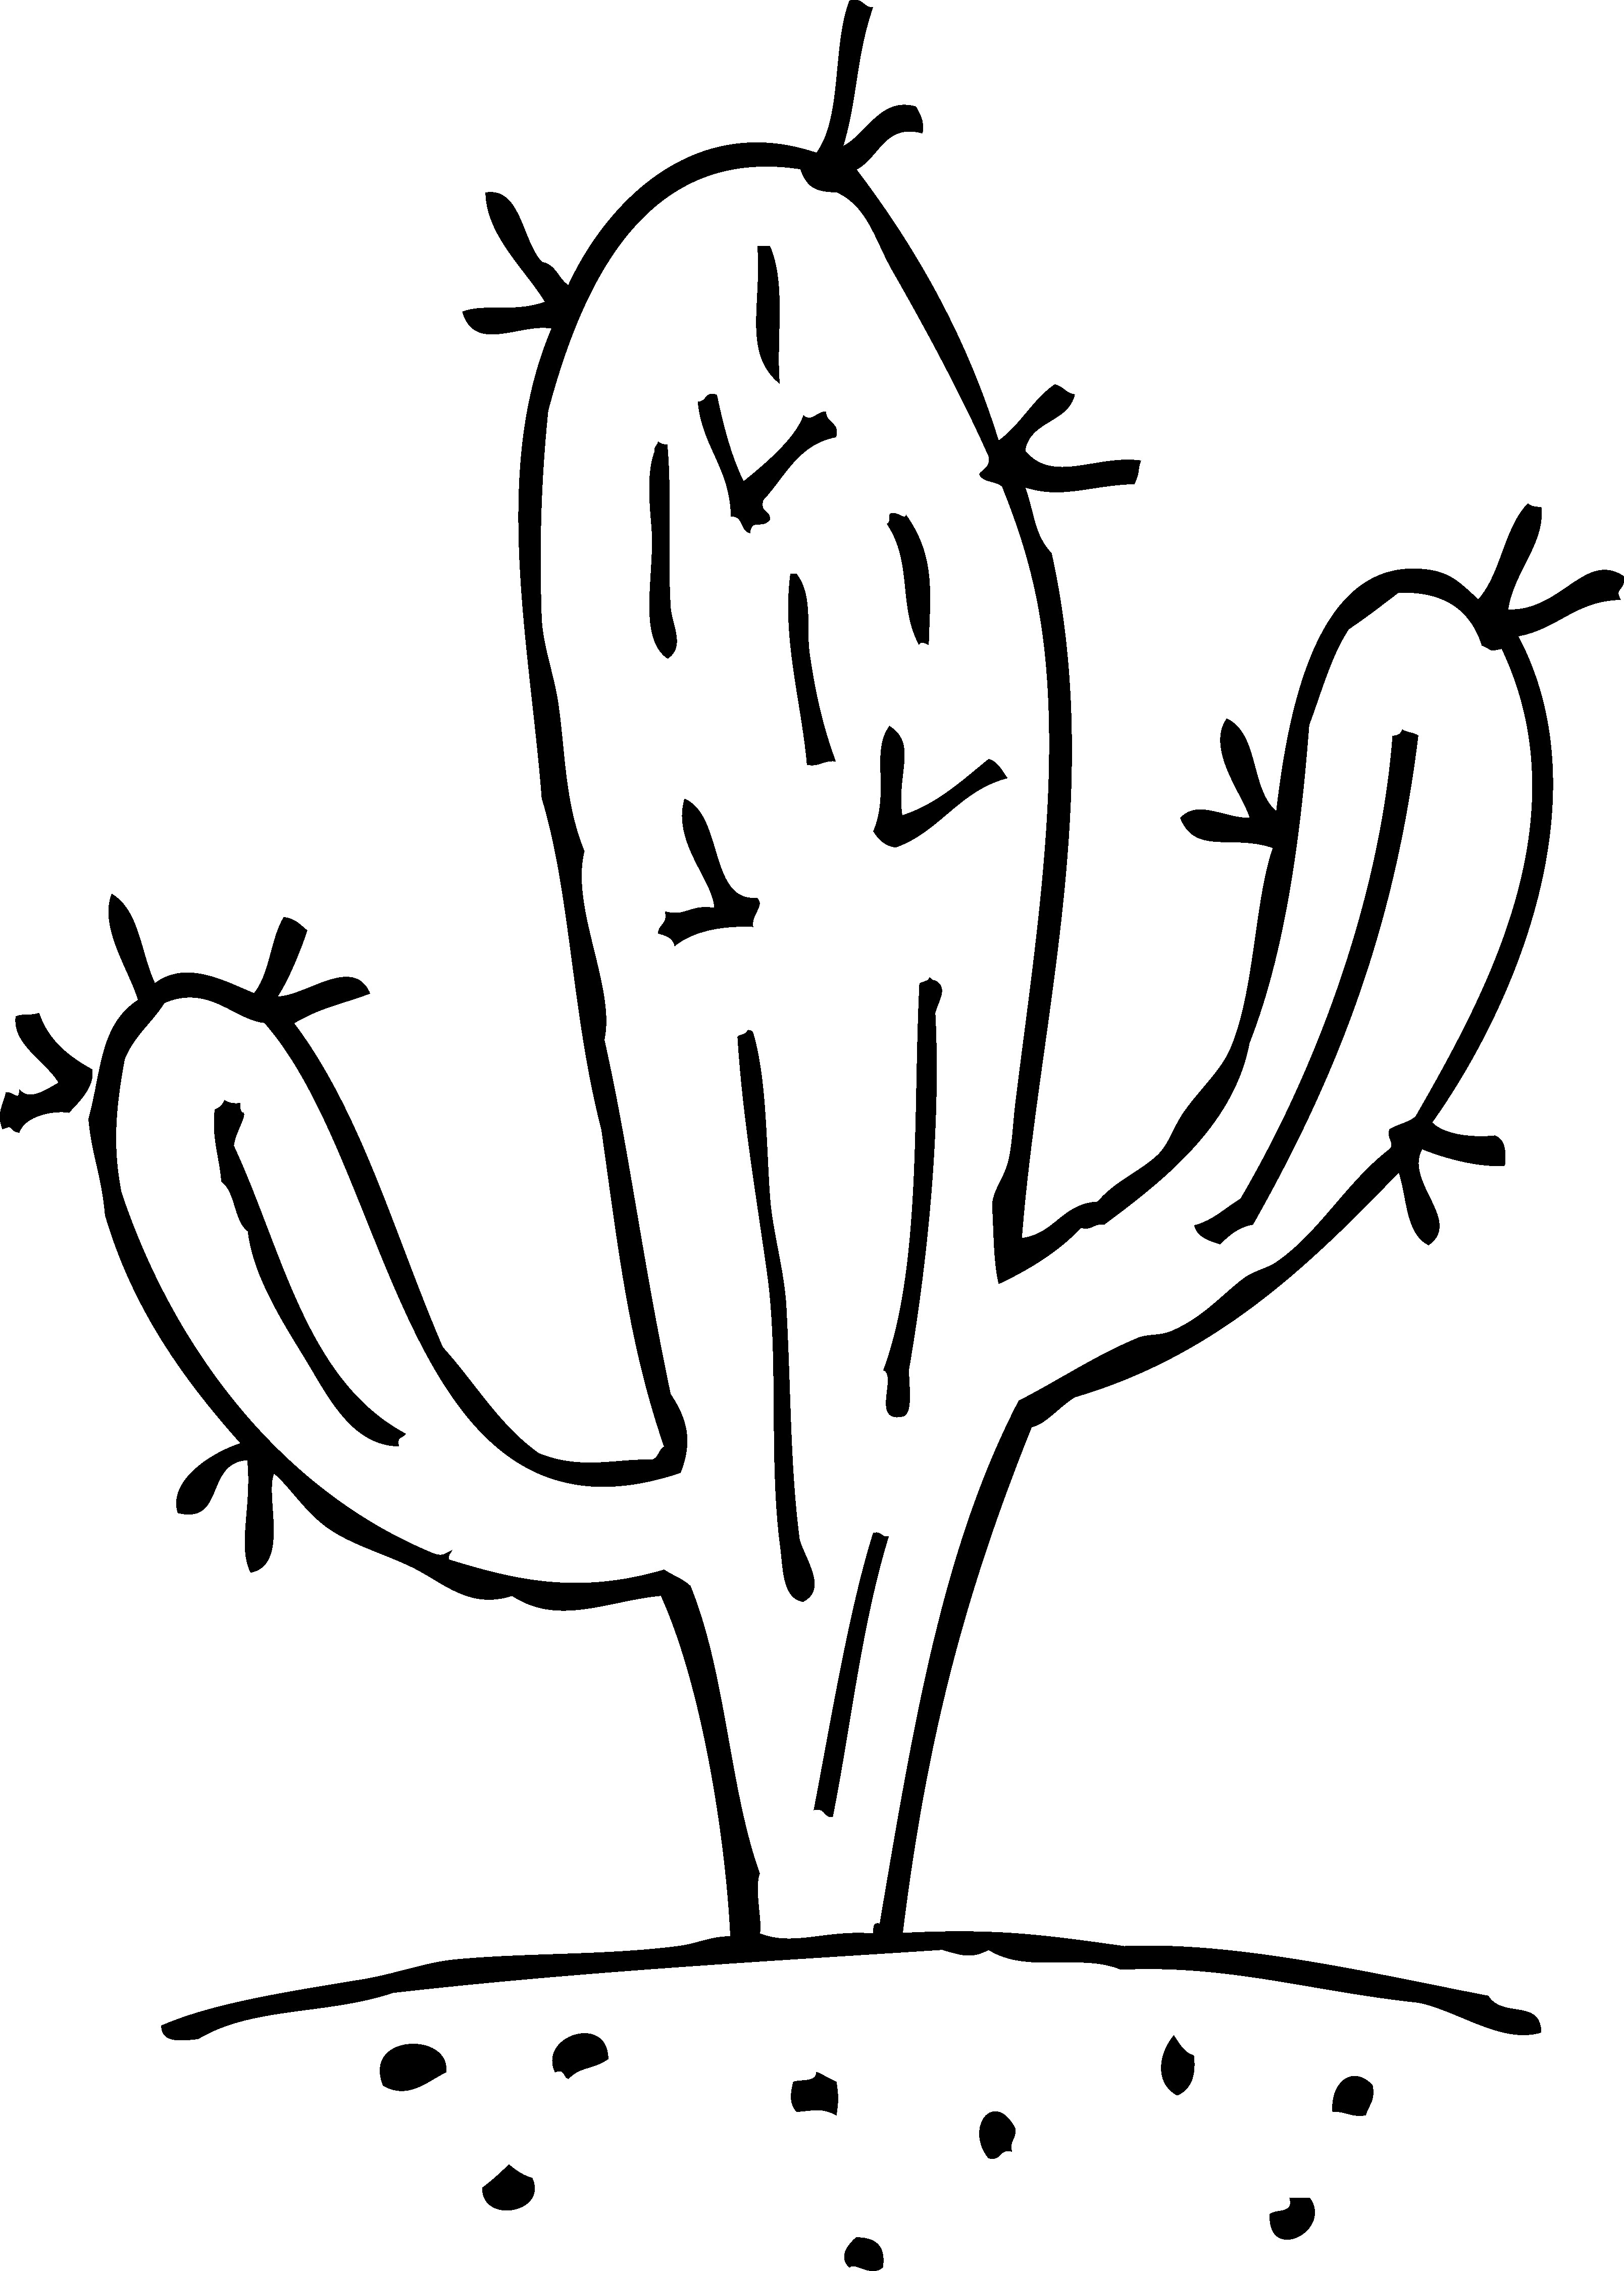 Prickly Cactus Coloring Page Free Clip Art - Cactus Black And White (3216x4497)